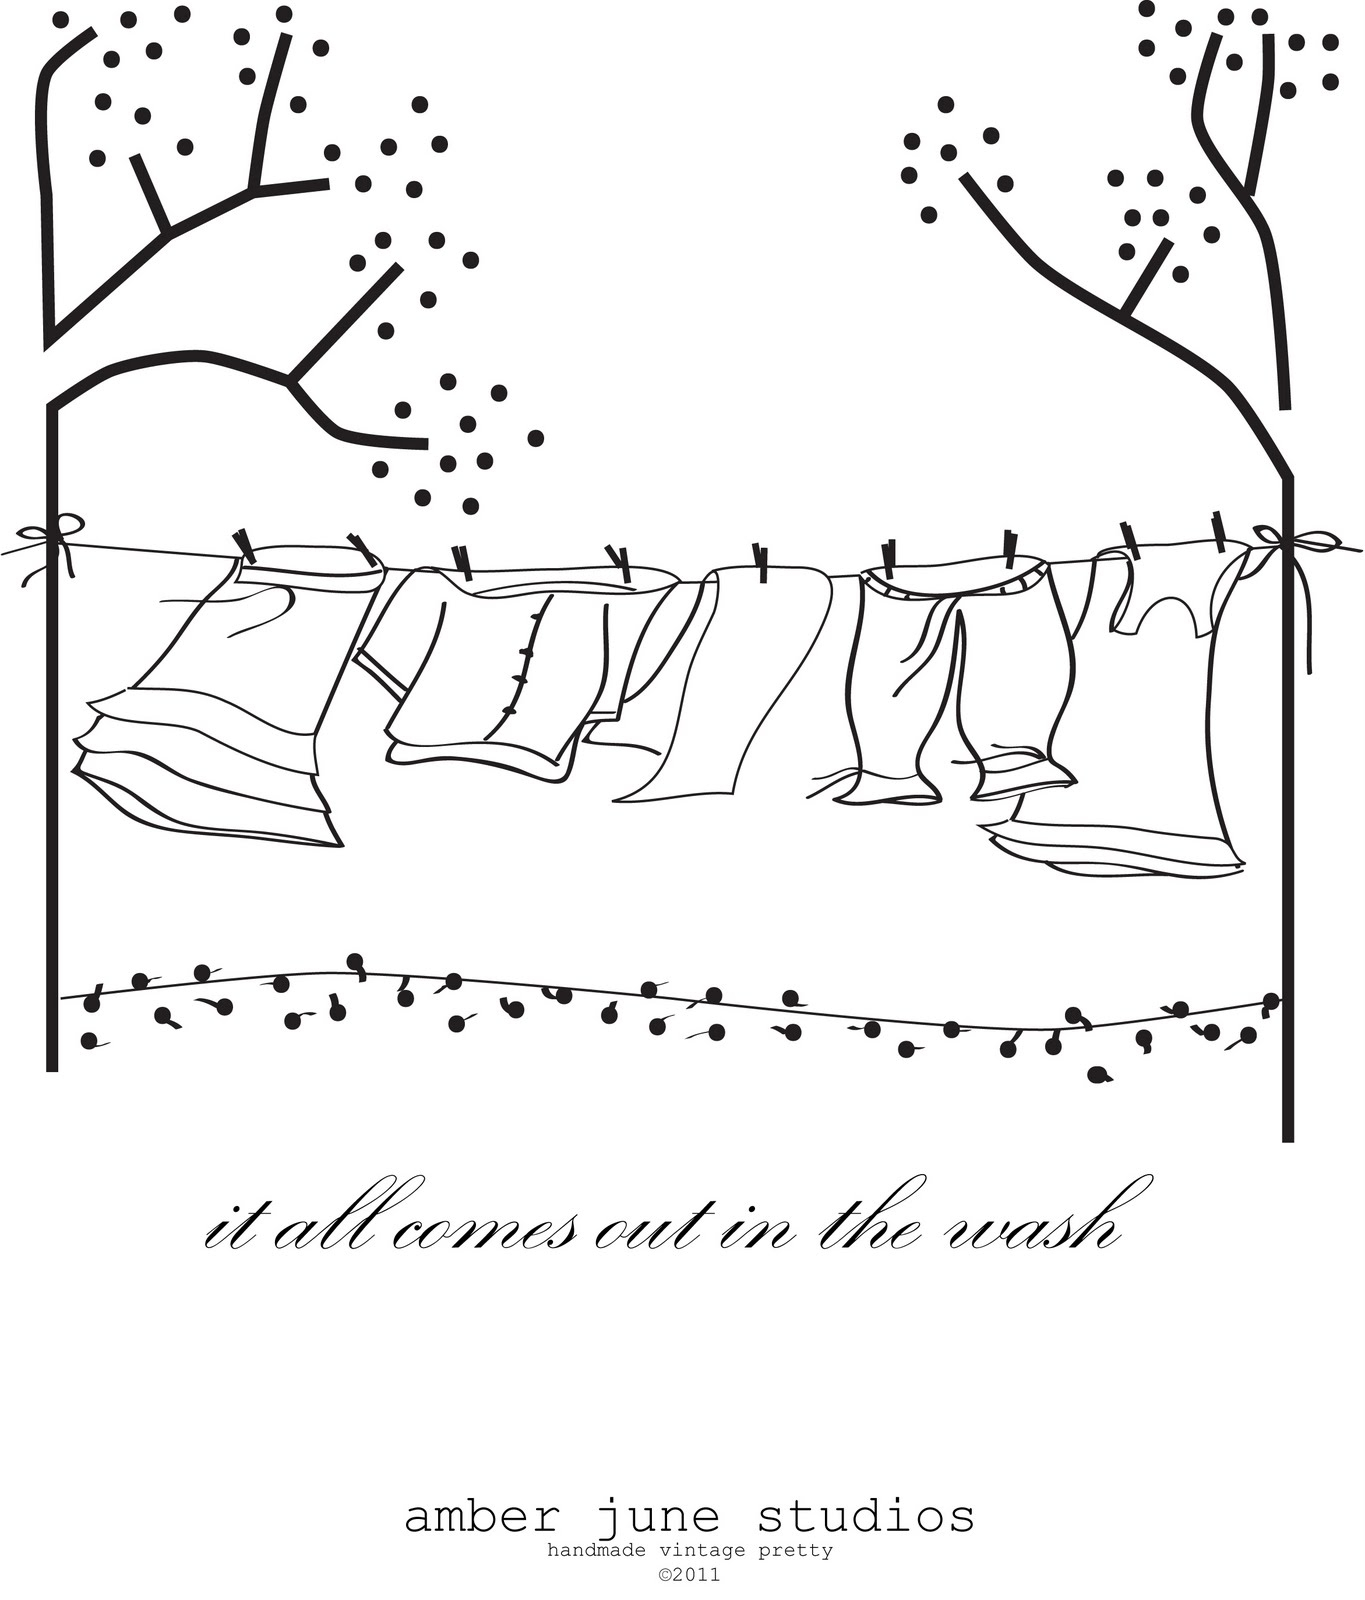 Printable Embroidery Patterns Amber June Studios Embroidery